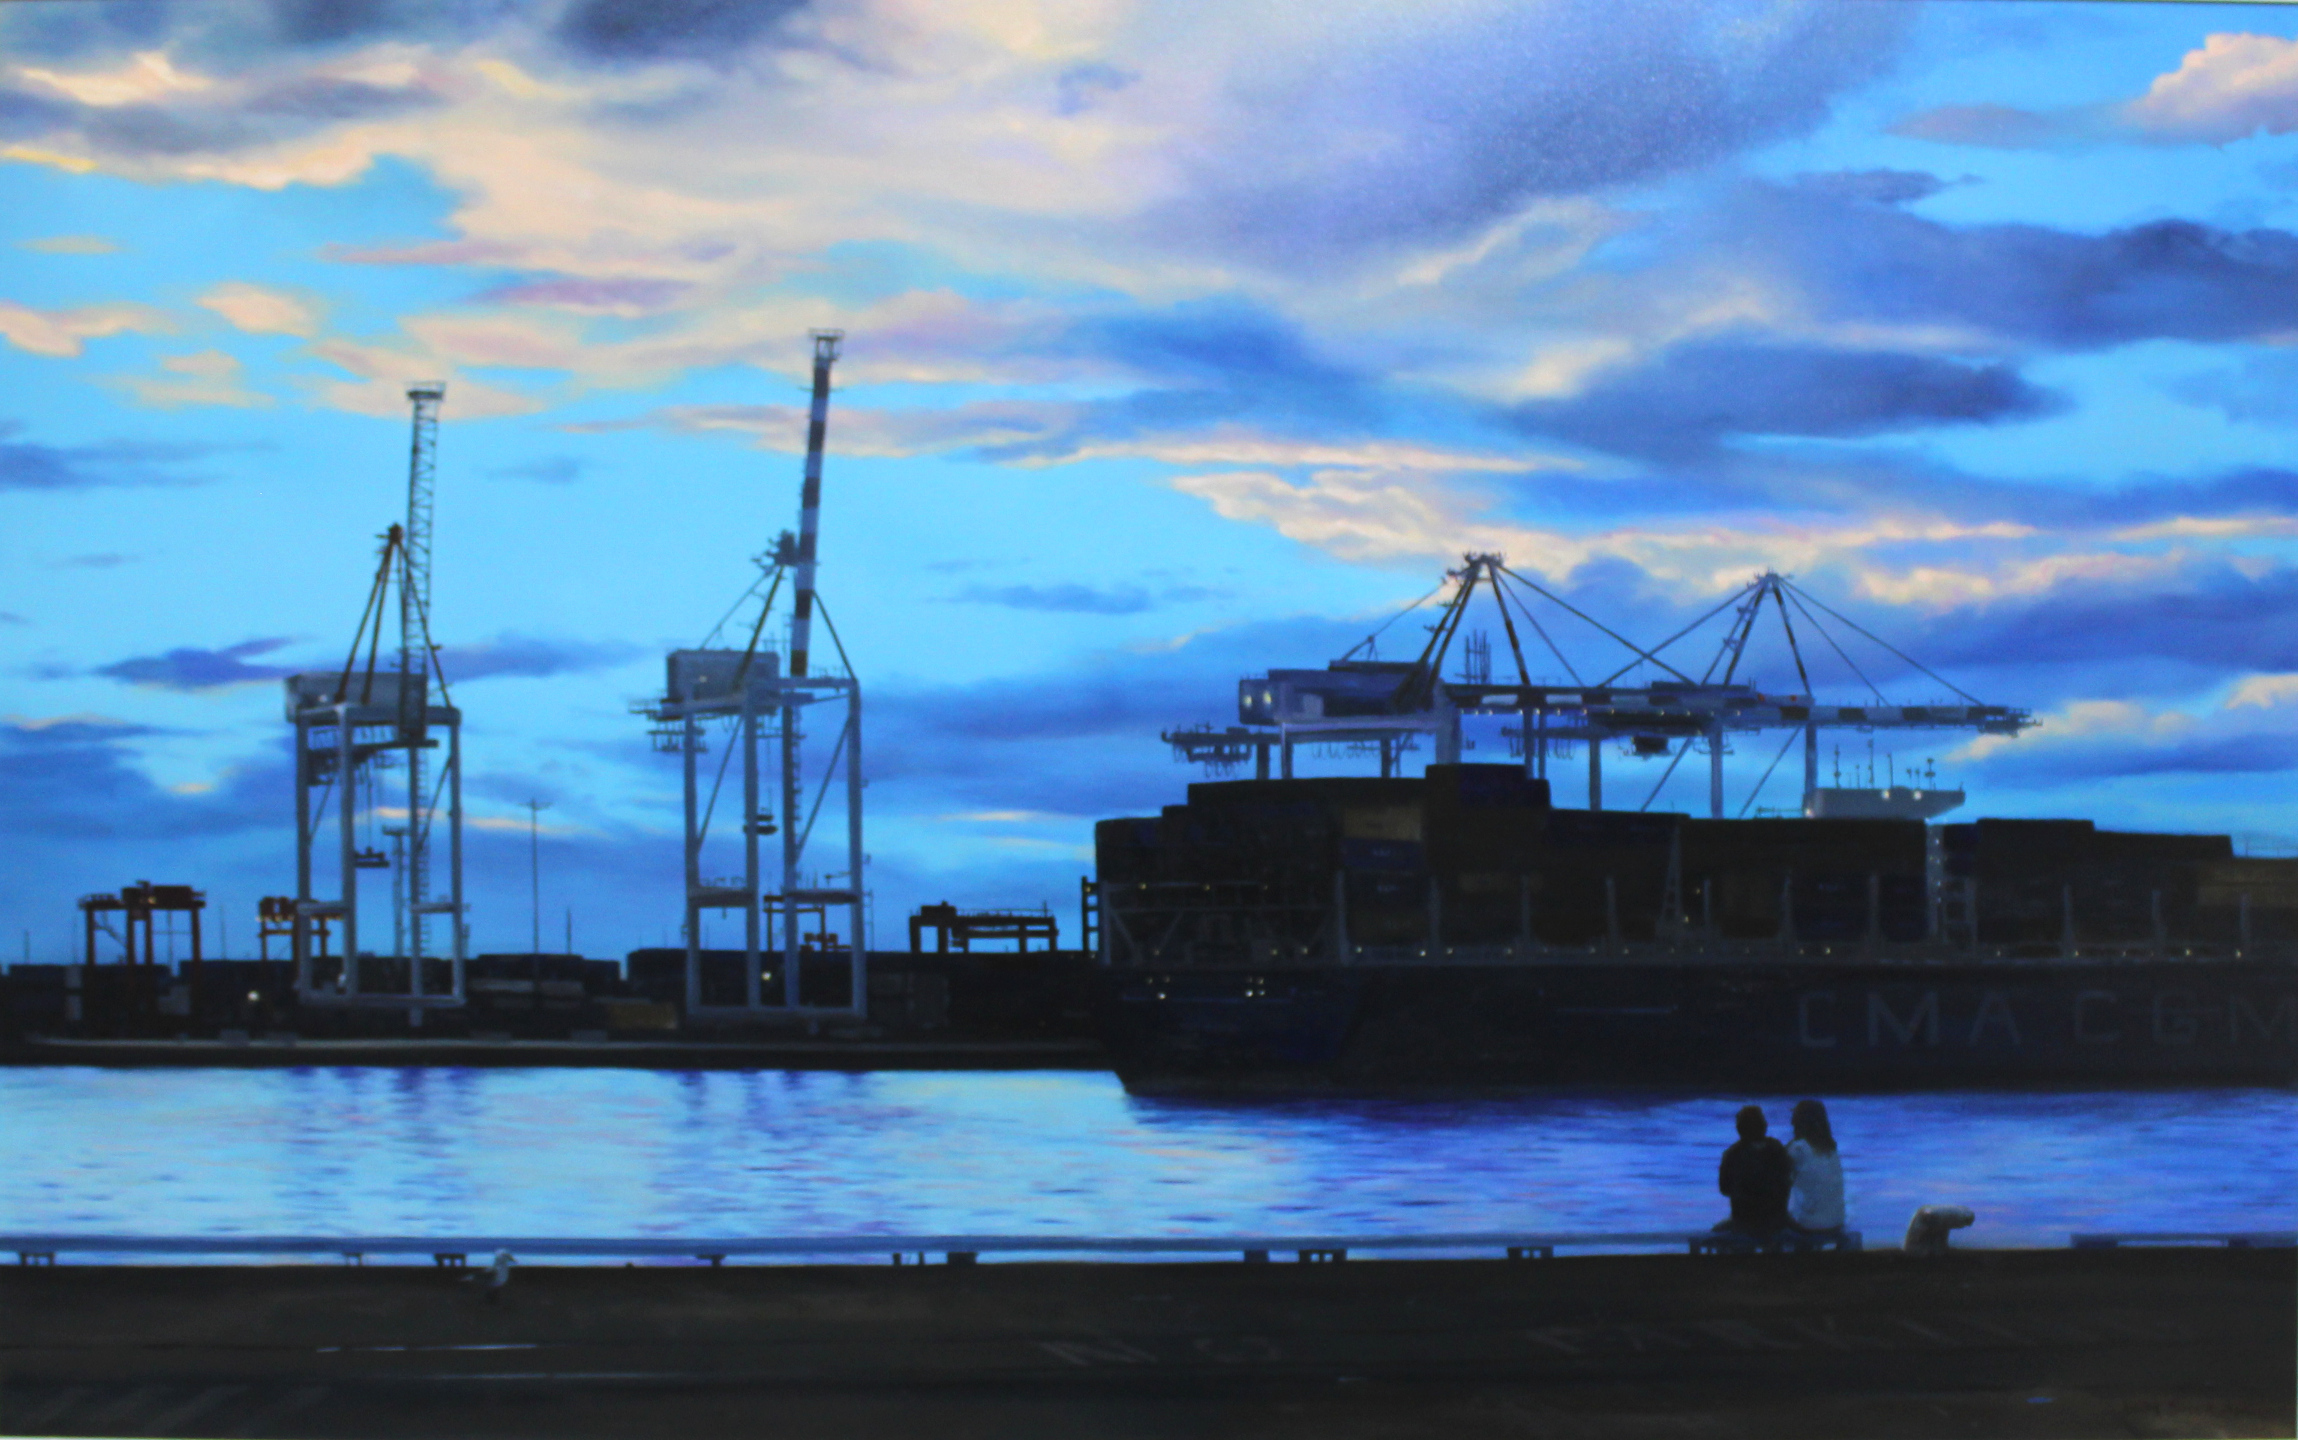 An original oil painting by Western Australian Artist Ben Sherar showing late afternoon over Fremantle Port